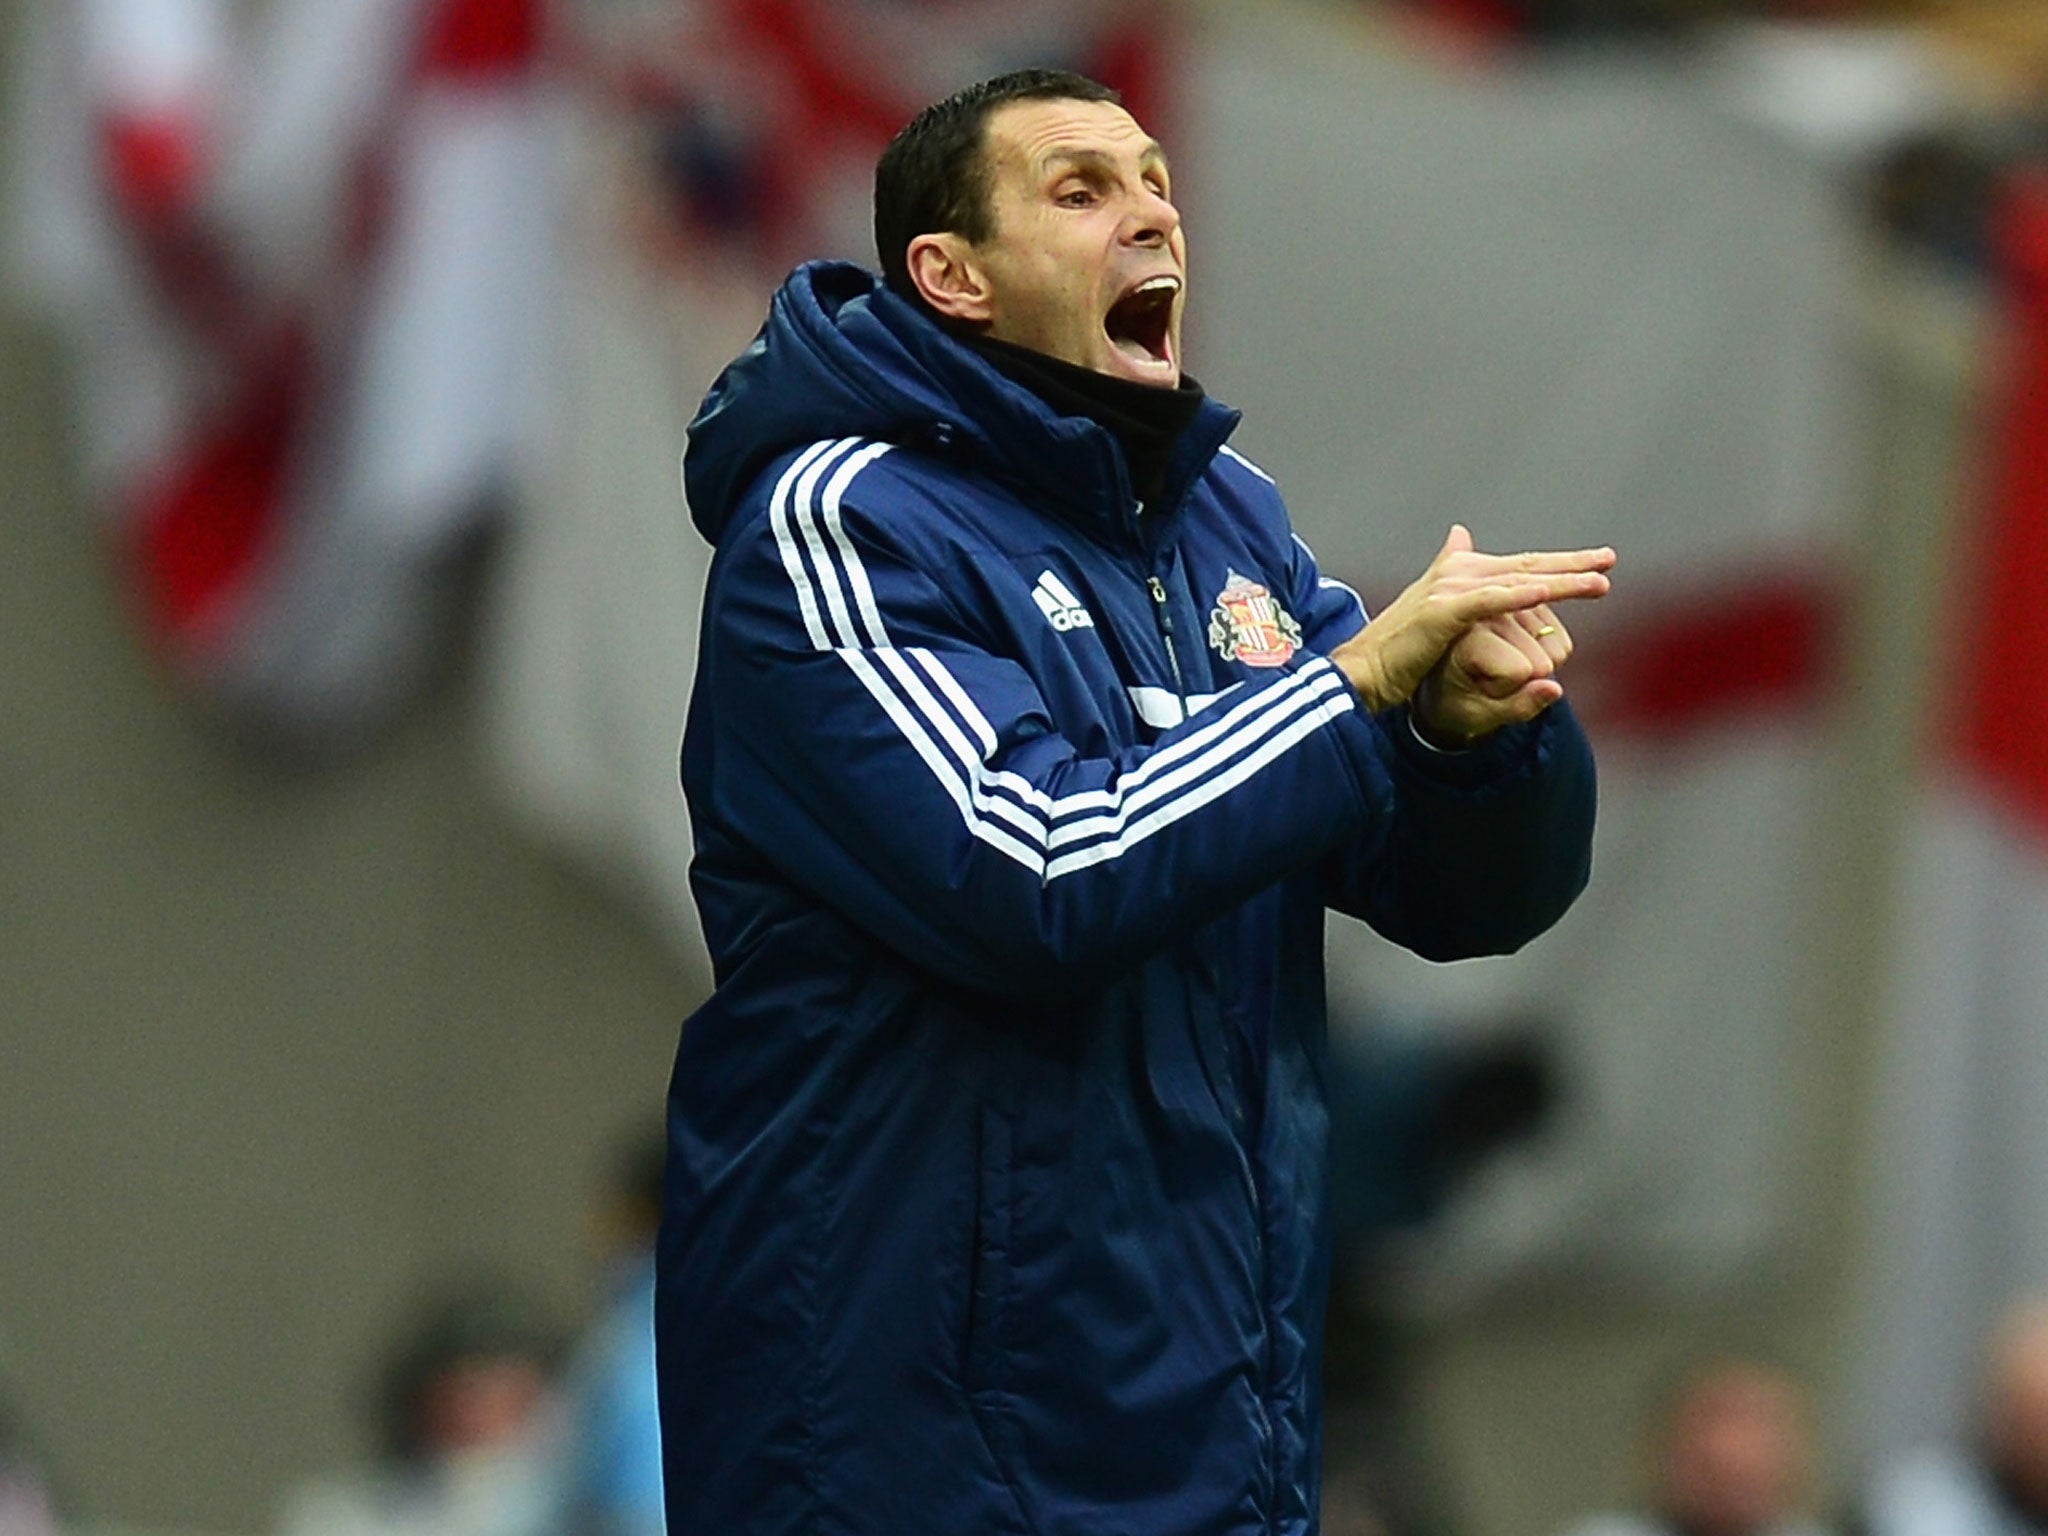 Gus Poyet makes a gesture from the touchline